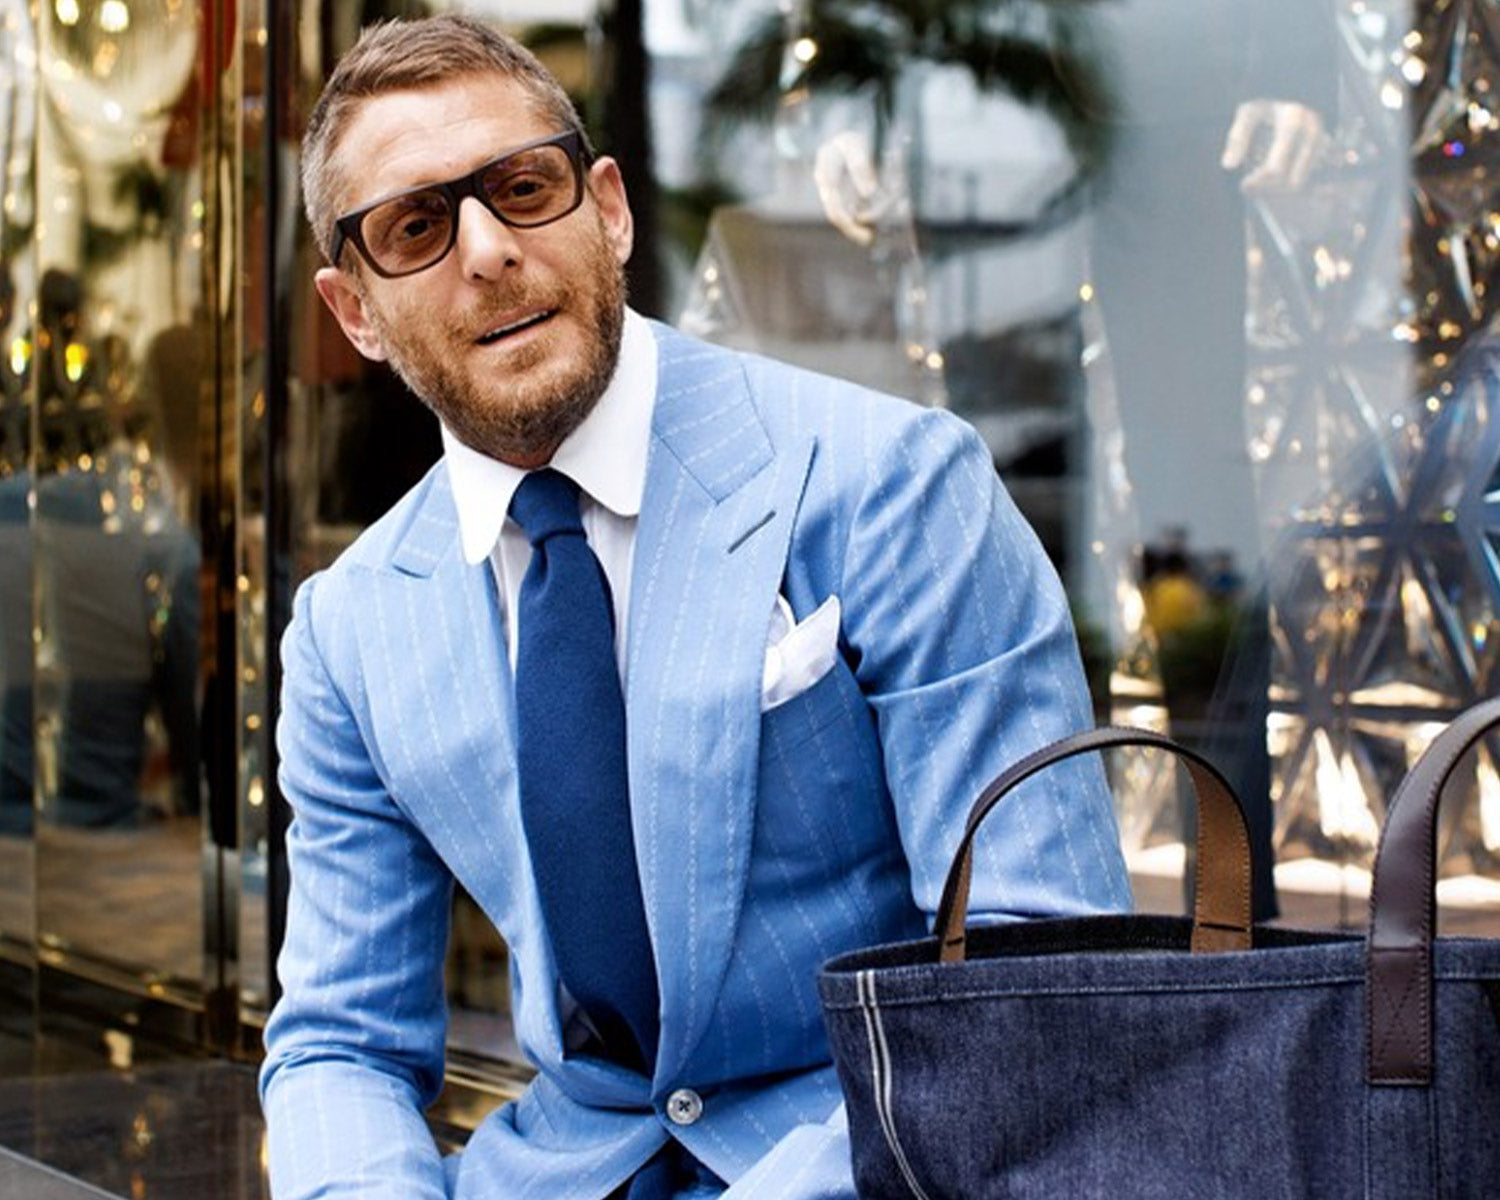 Refining Spring Suits for Men so You're in Full Bloom - Lapo Elkann in Light Blue Suit and Blue Tie